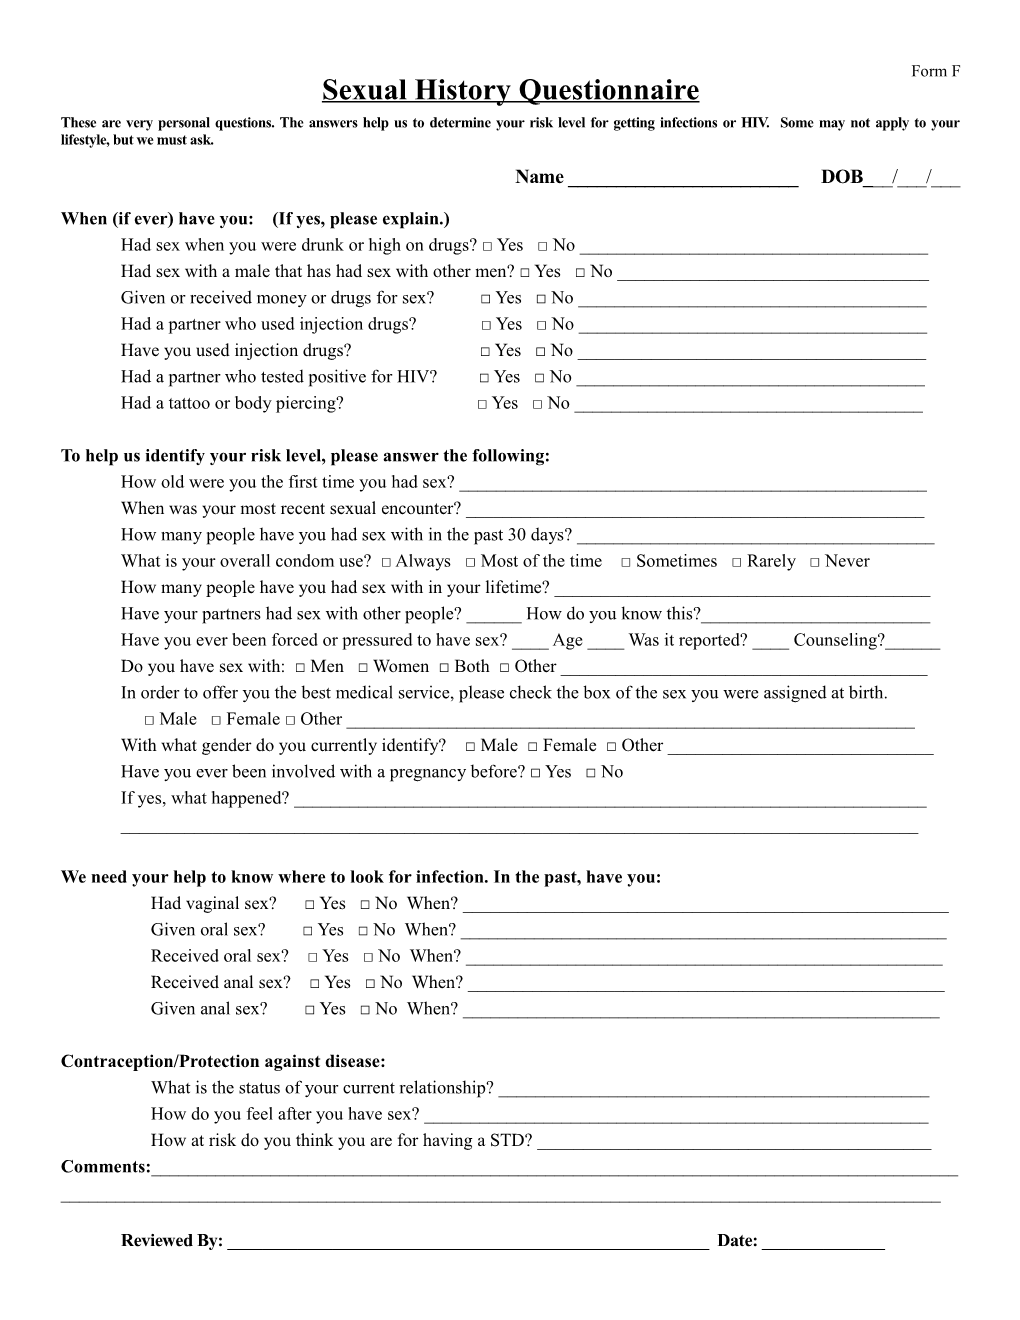 Sexual History Questionnaire